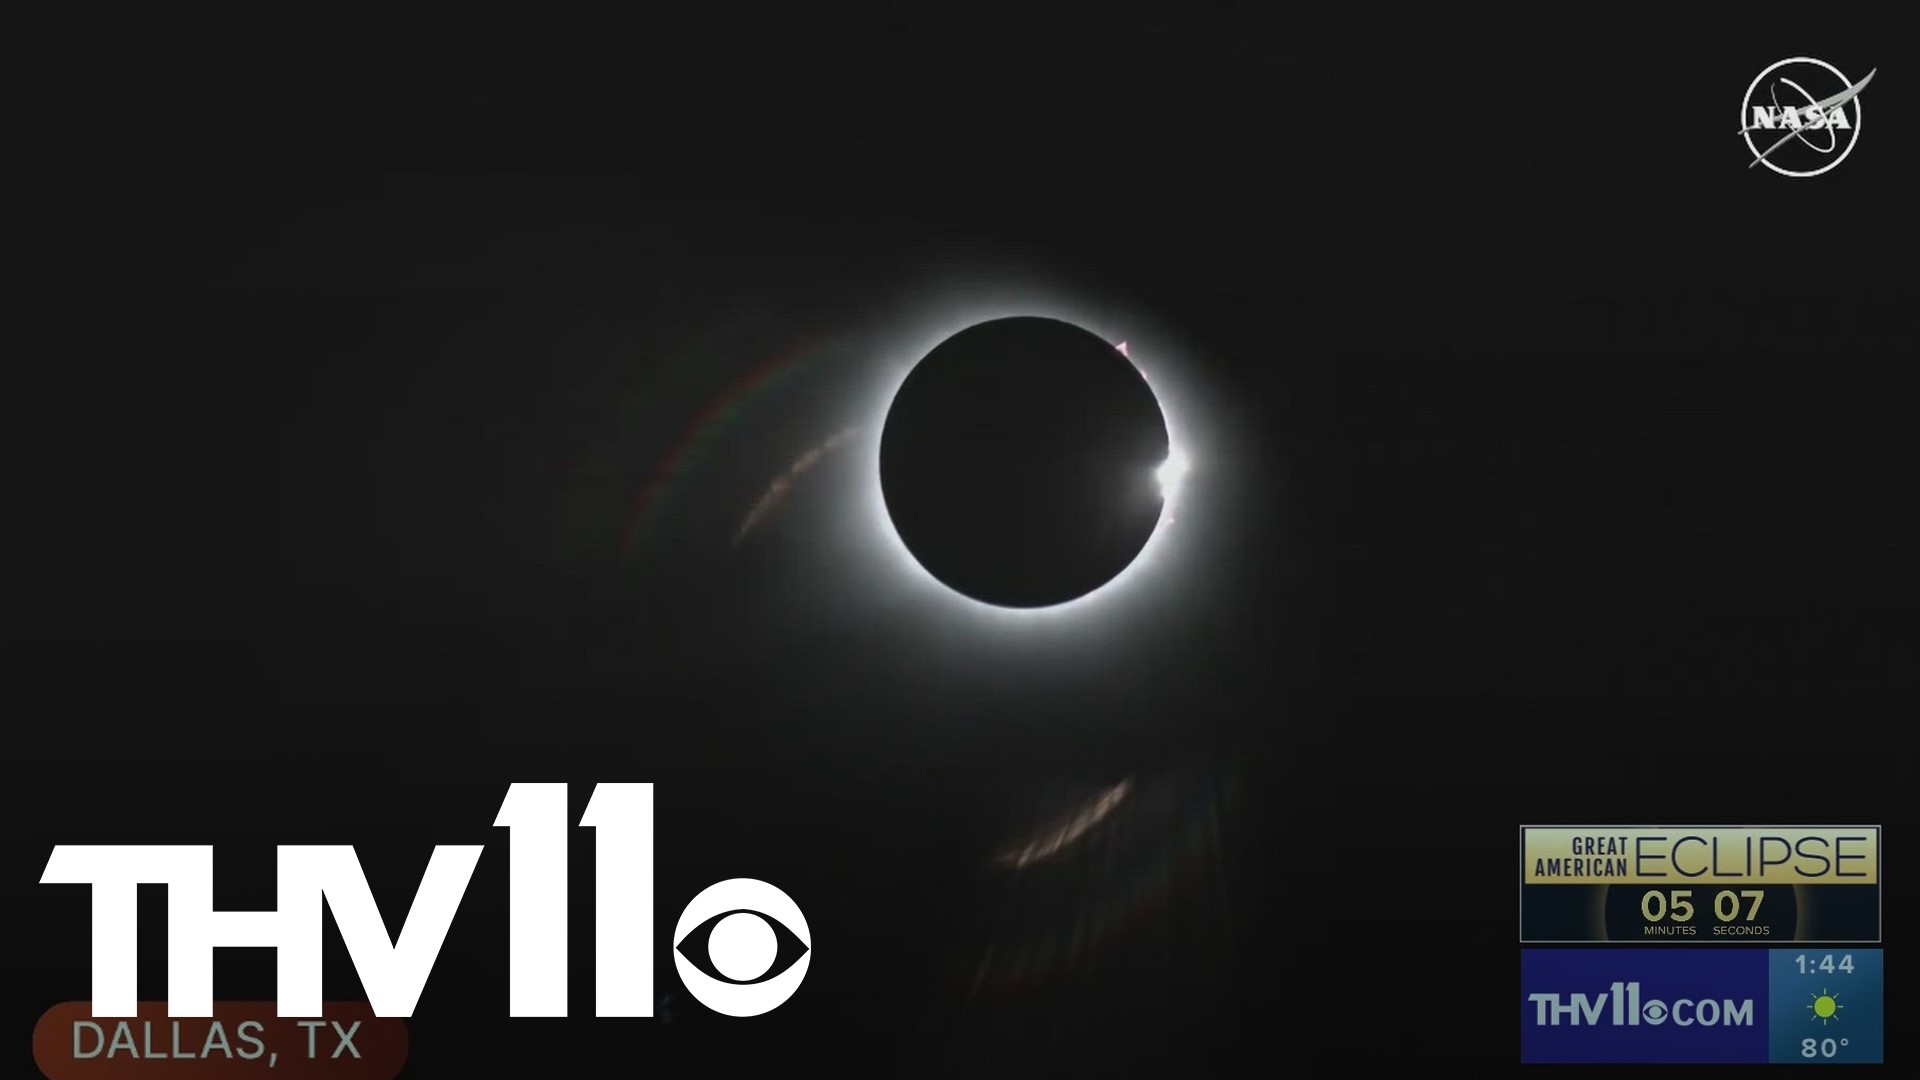 Here's a look at the total solar eclipse's diamond ring effect that was observed in Dallas, Texas.